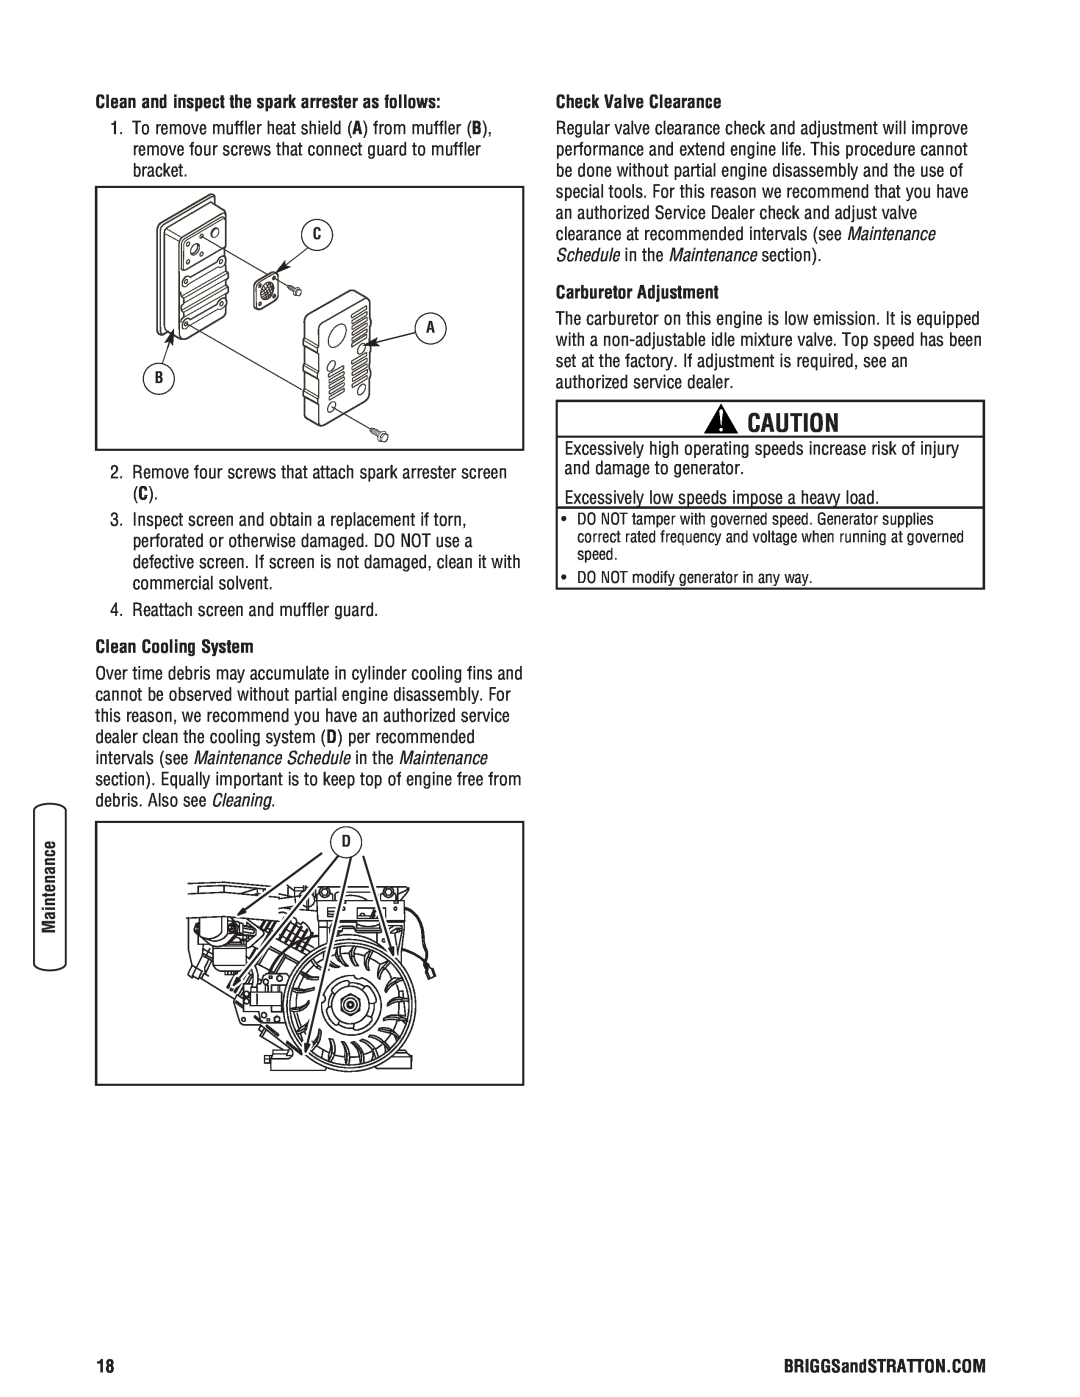 Briggs & Stratton Portable Generator manual Clean and inspect the spark arrester as follows, Clean Cooling System 